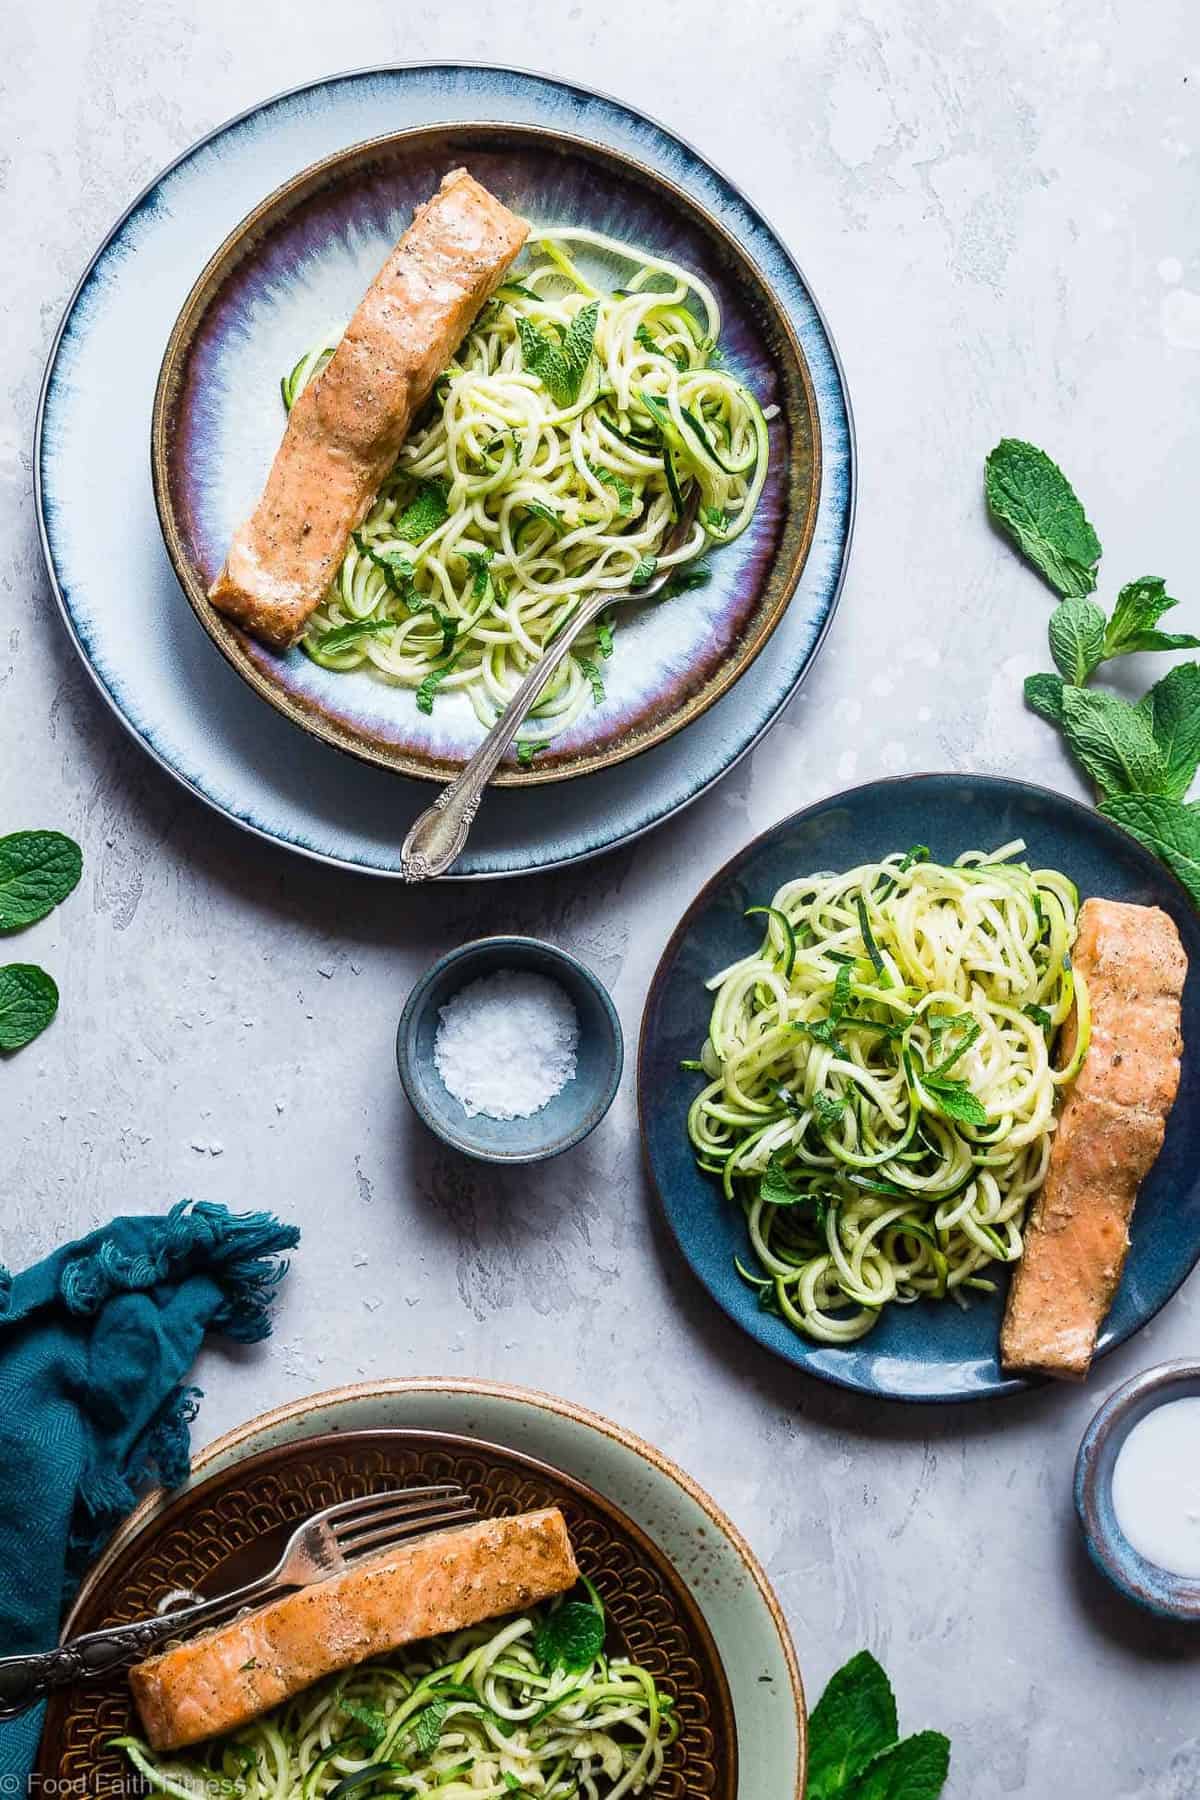 Whole30 Indian Salmon Curry Zucchini Noodles - A SUPER easy, 5-ingredient, healthy meal that is paleo, gluten free, low carb and whole30 compliant! Perfect for busy weeknights! | #Foodfaithfitness | #Paleo #Lowcarb #Whole30 #Healthy #Keto